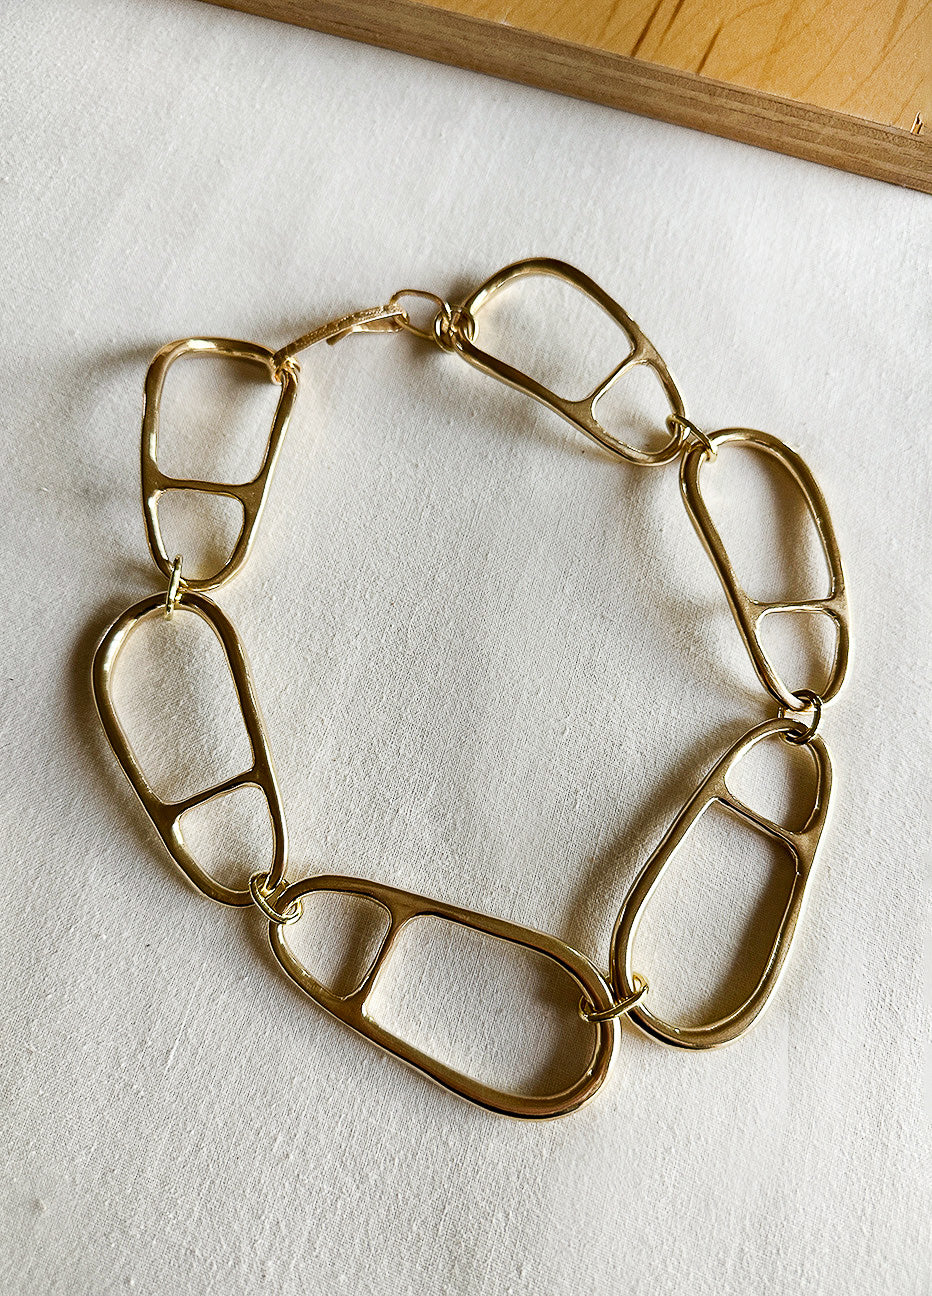 Lila Rice Luca Link Necklace